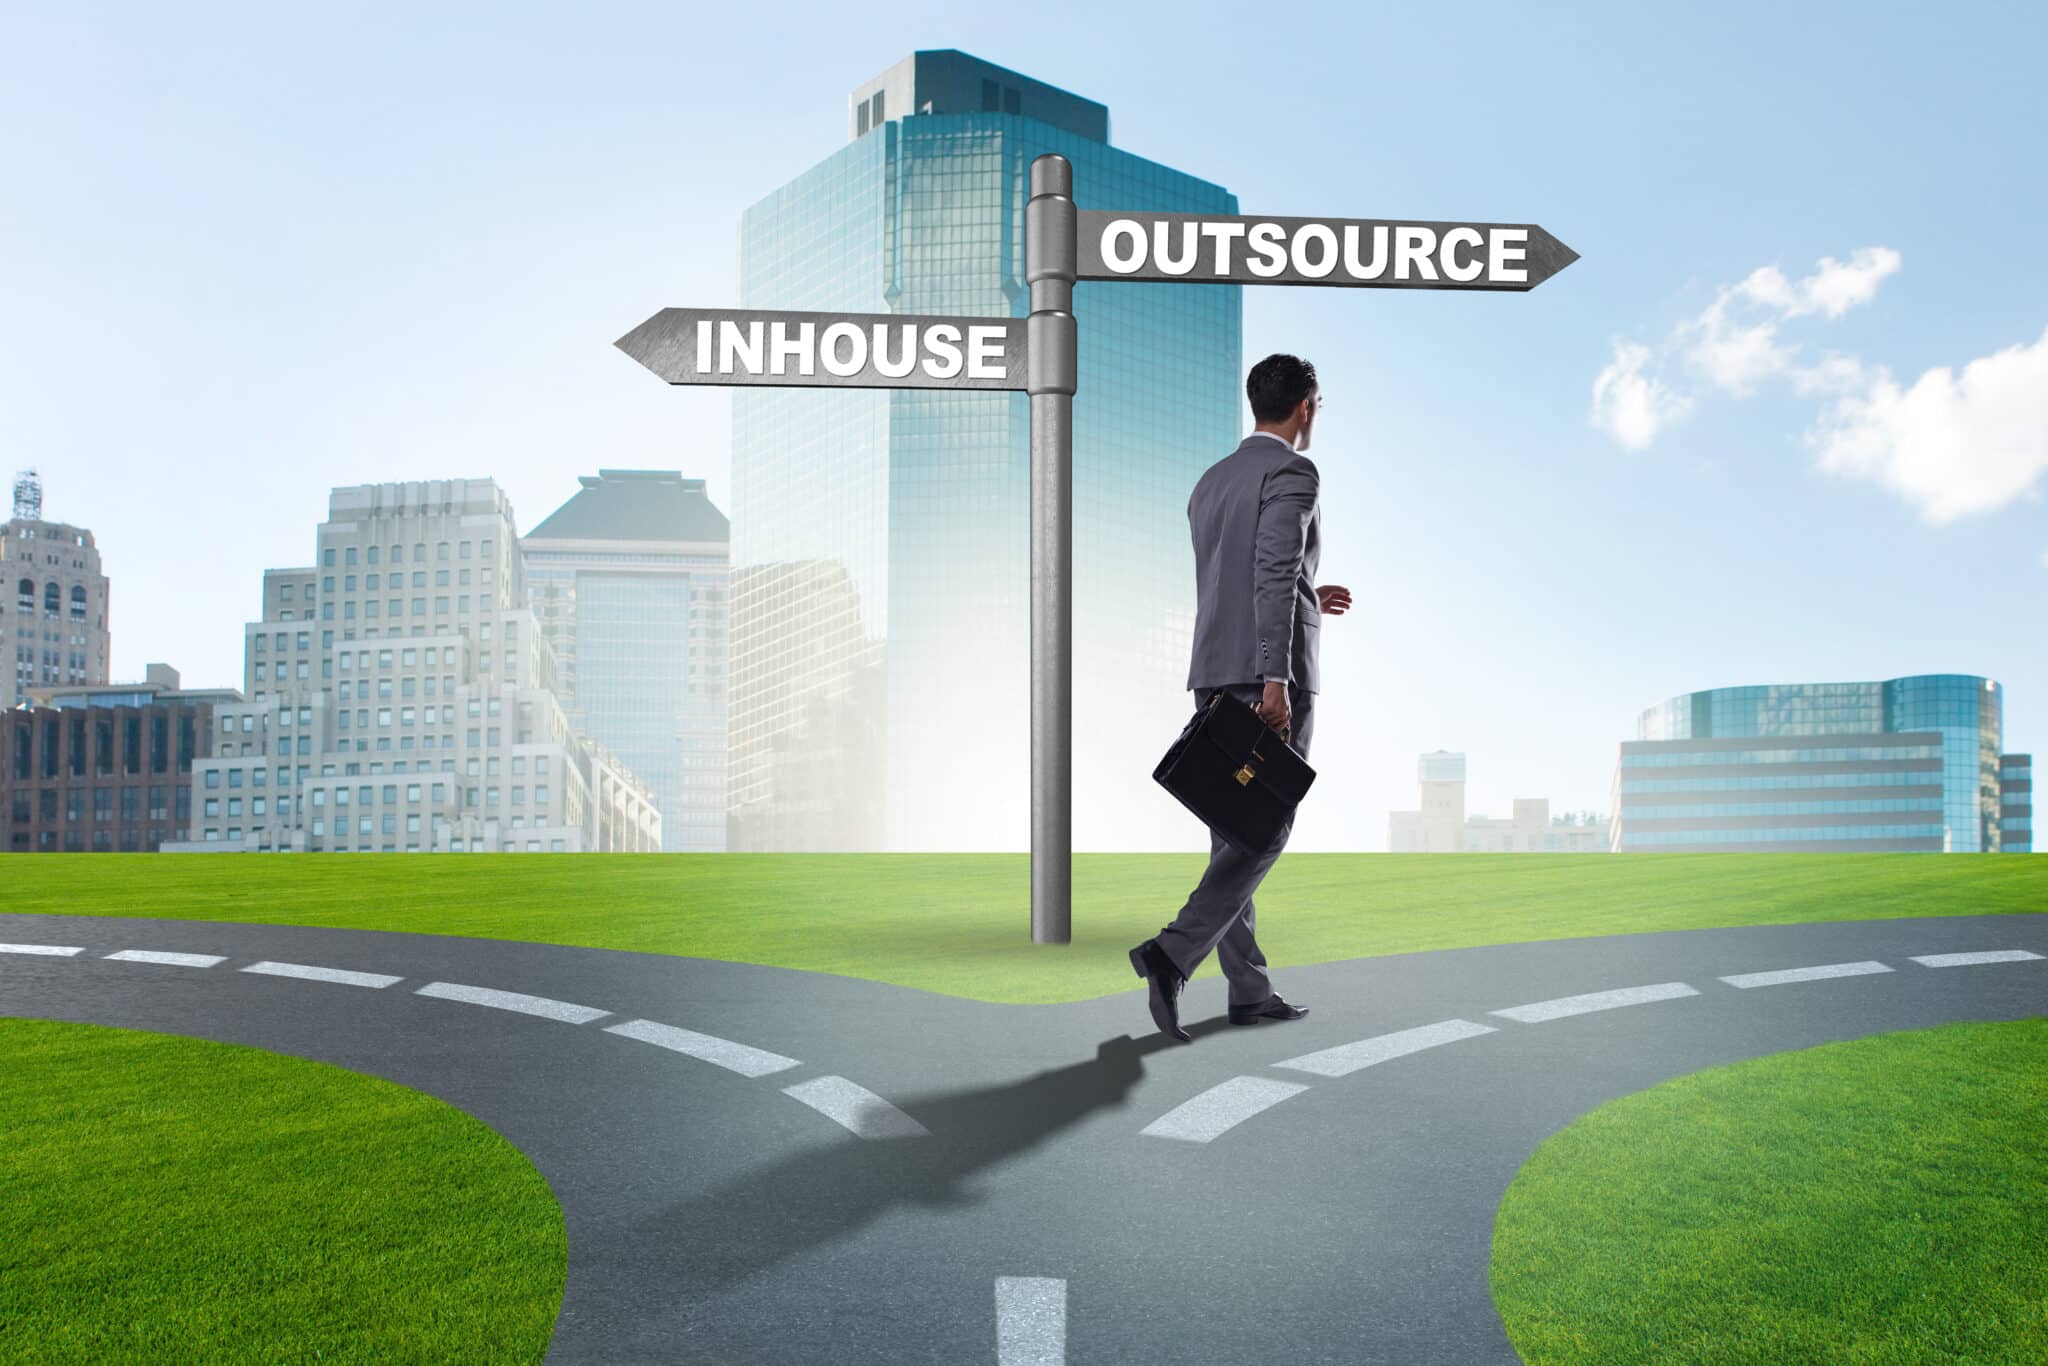 Healthcare professional choosing between 'Outsource' or 'In-House' paths for medical transcription.